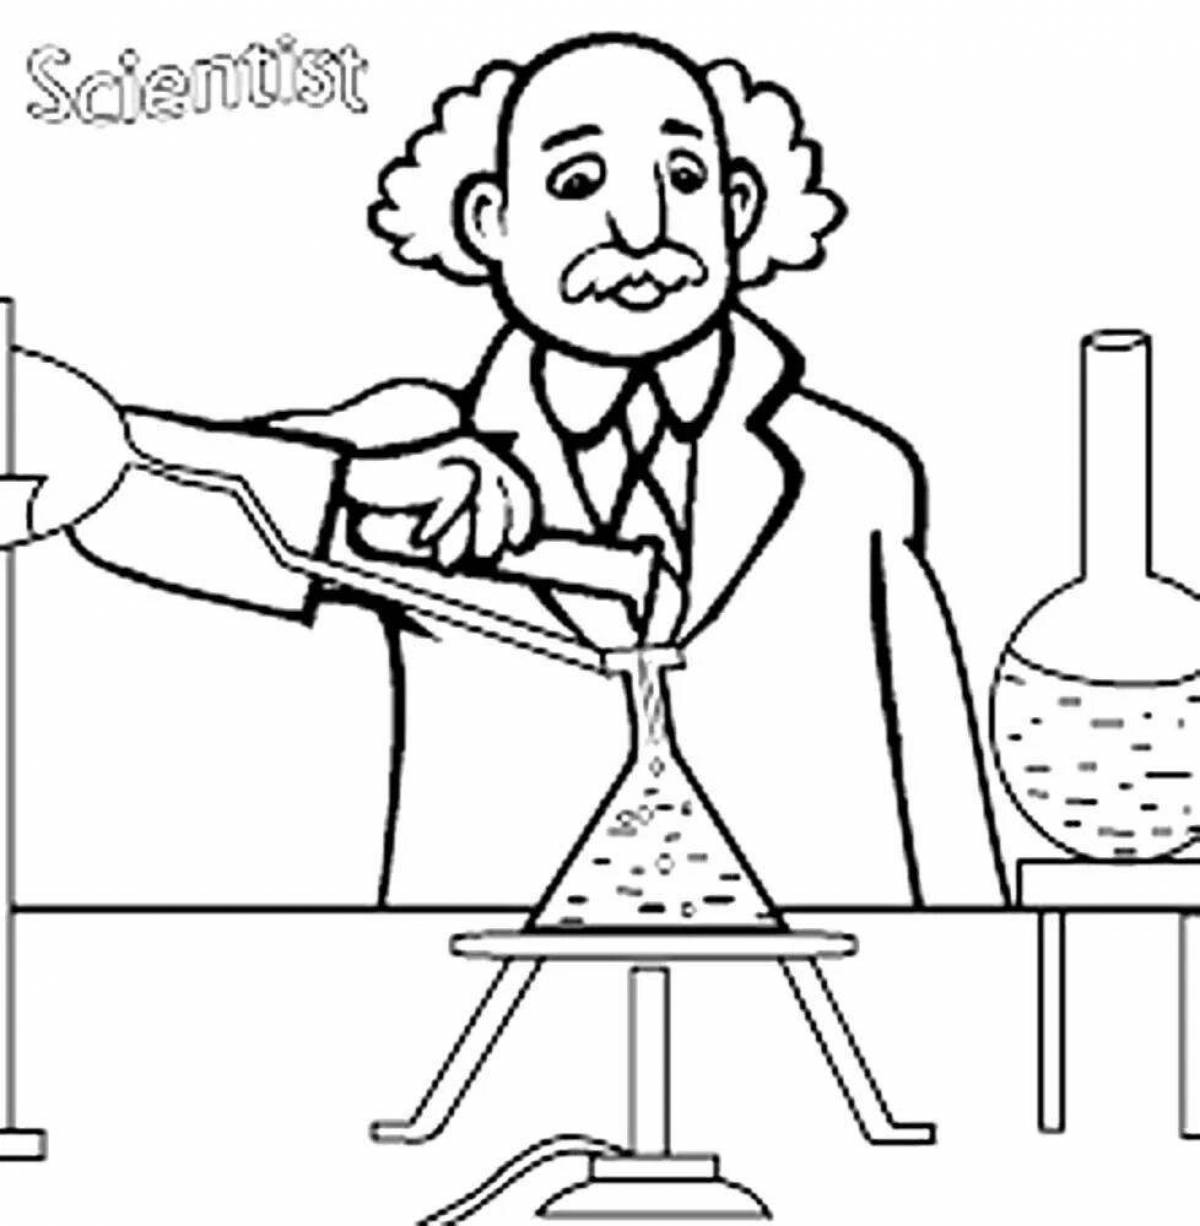 Bright chemistry coloring book for kids and teens